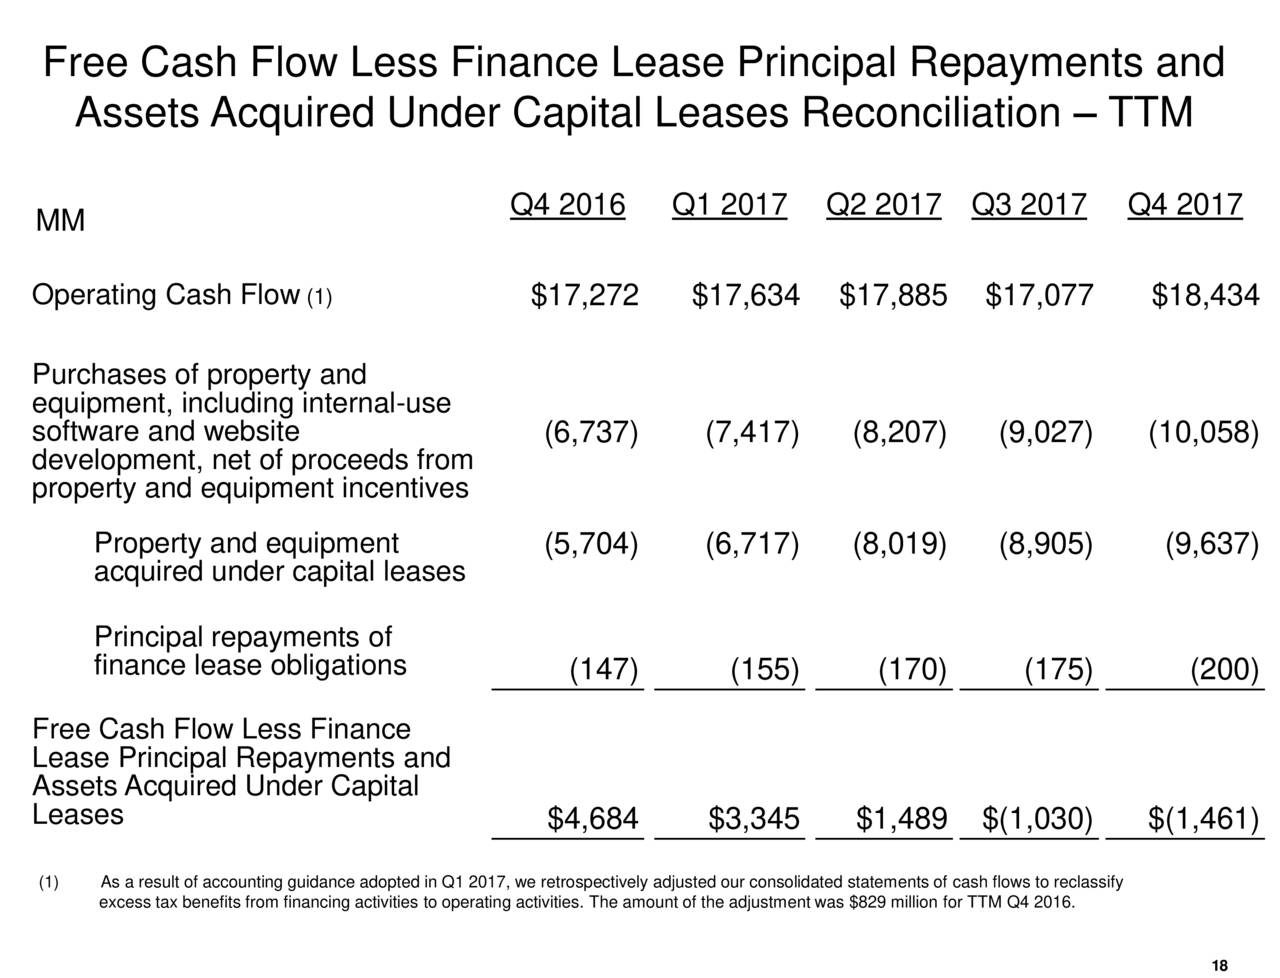 Free Cash Flow Less Finance Lease Principal Repayments and